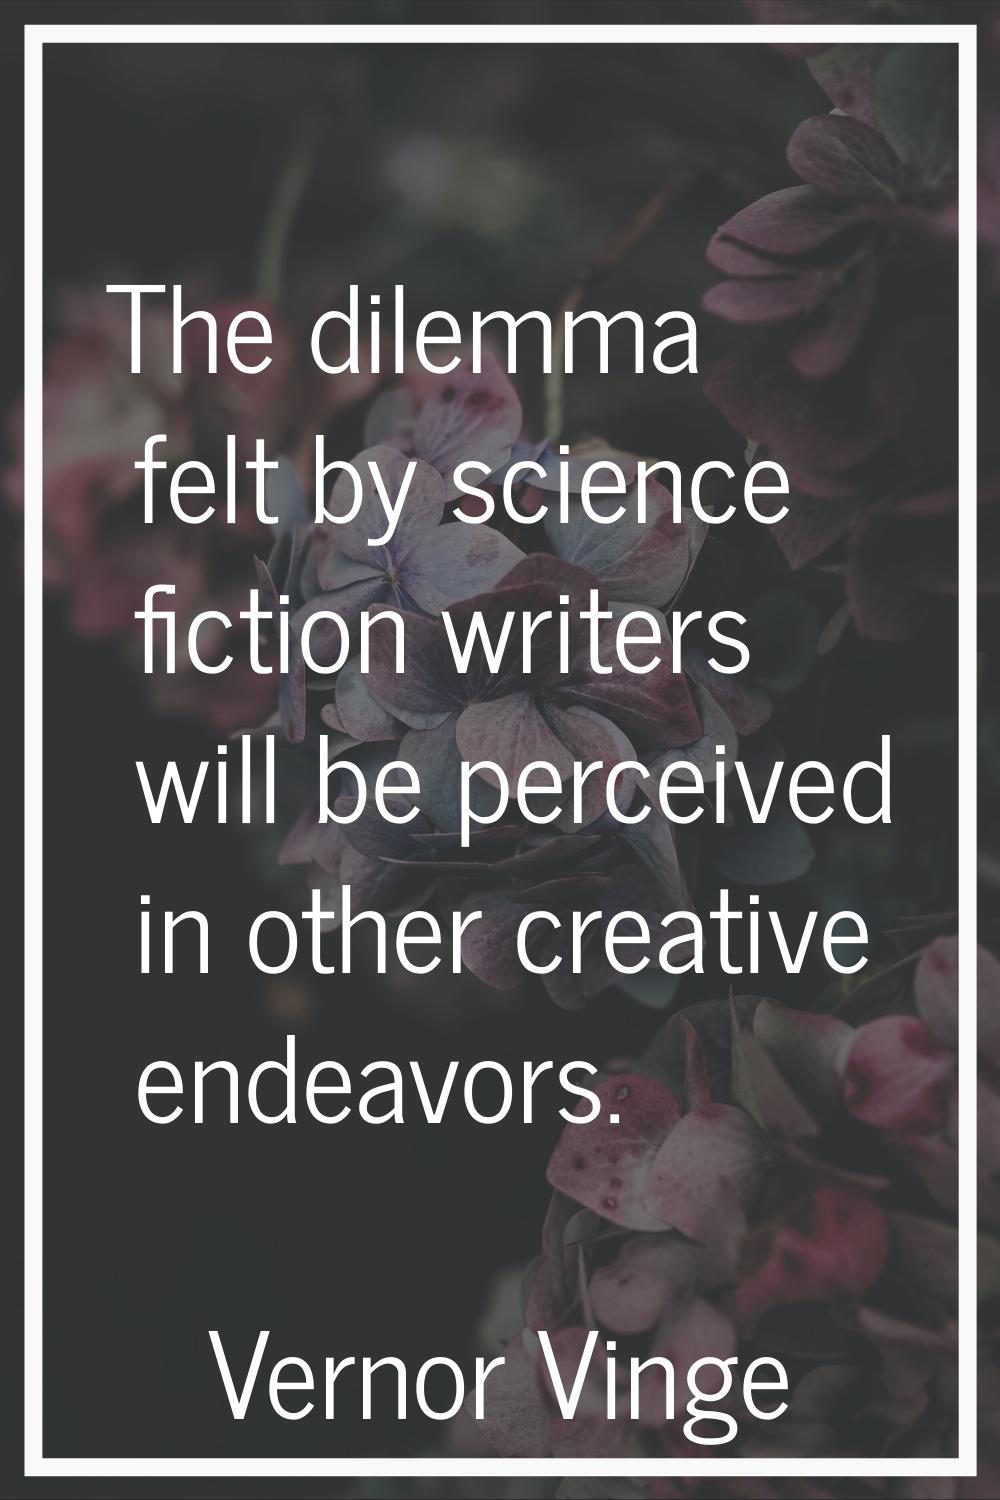 The dilemma felt by science fiction writers will be perceived in other creative endeavors.